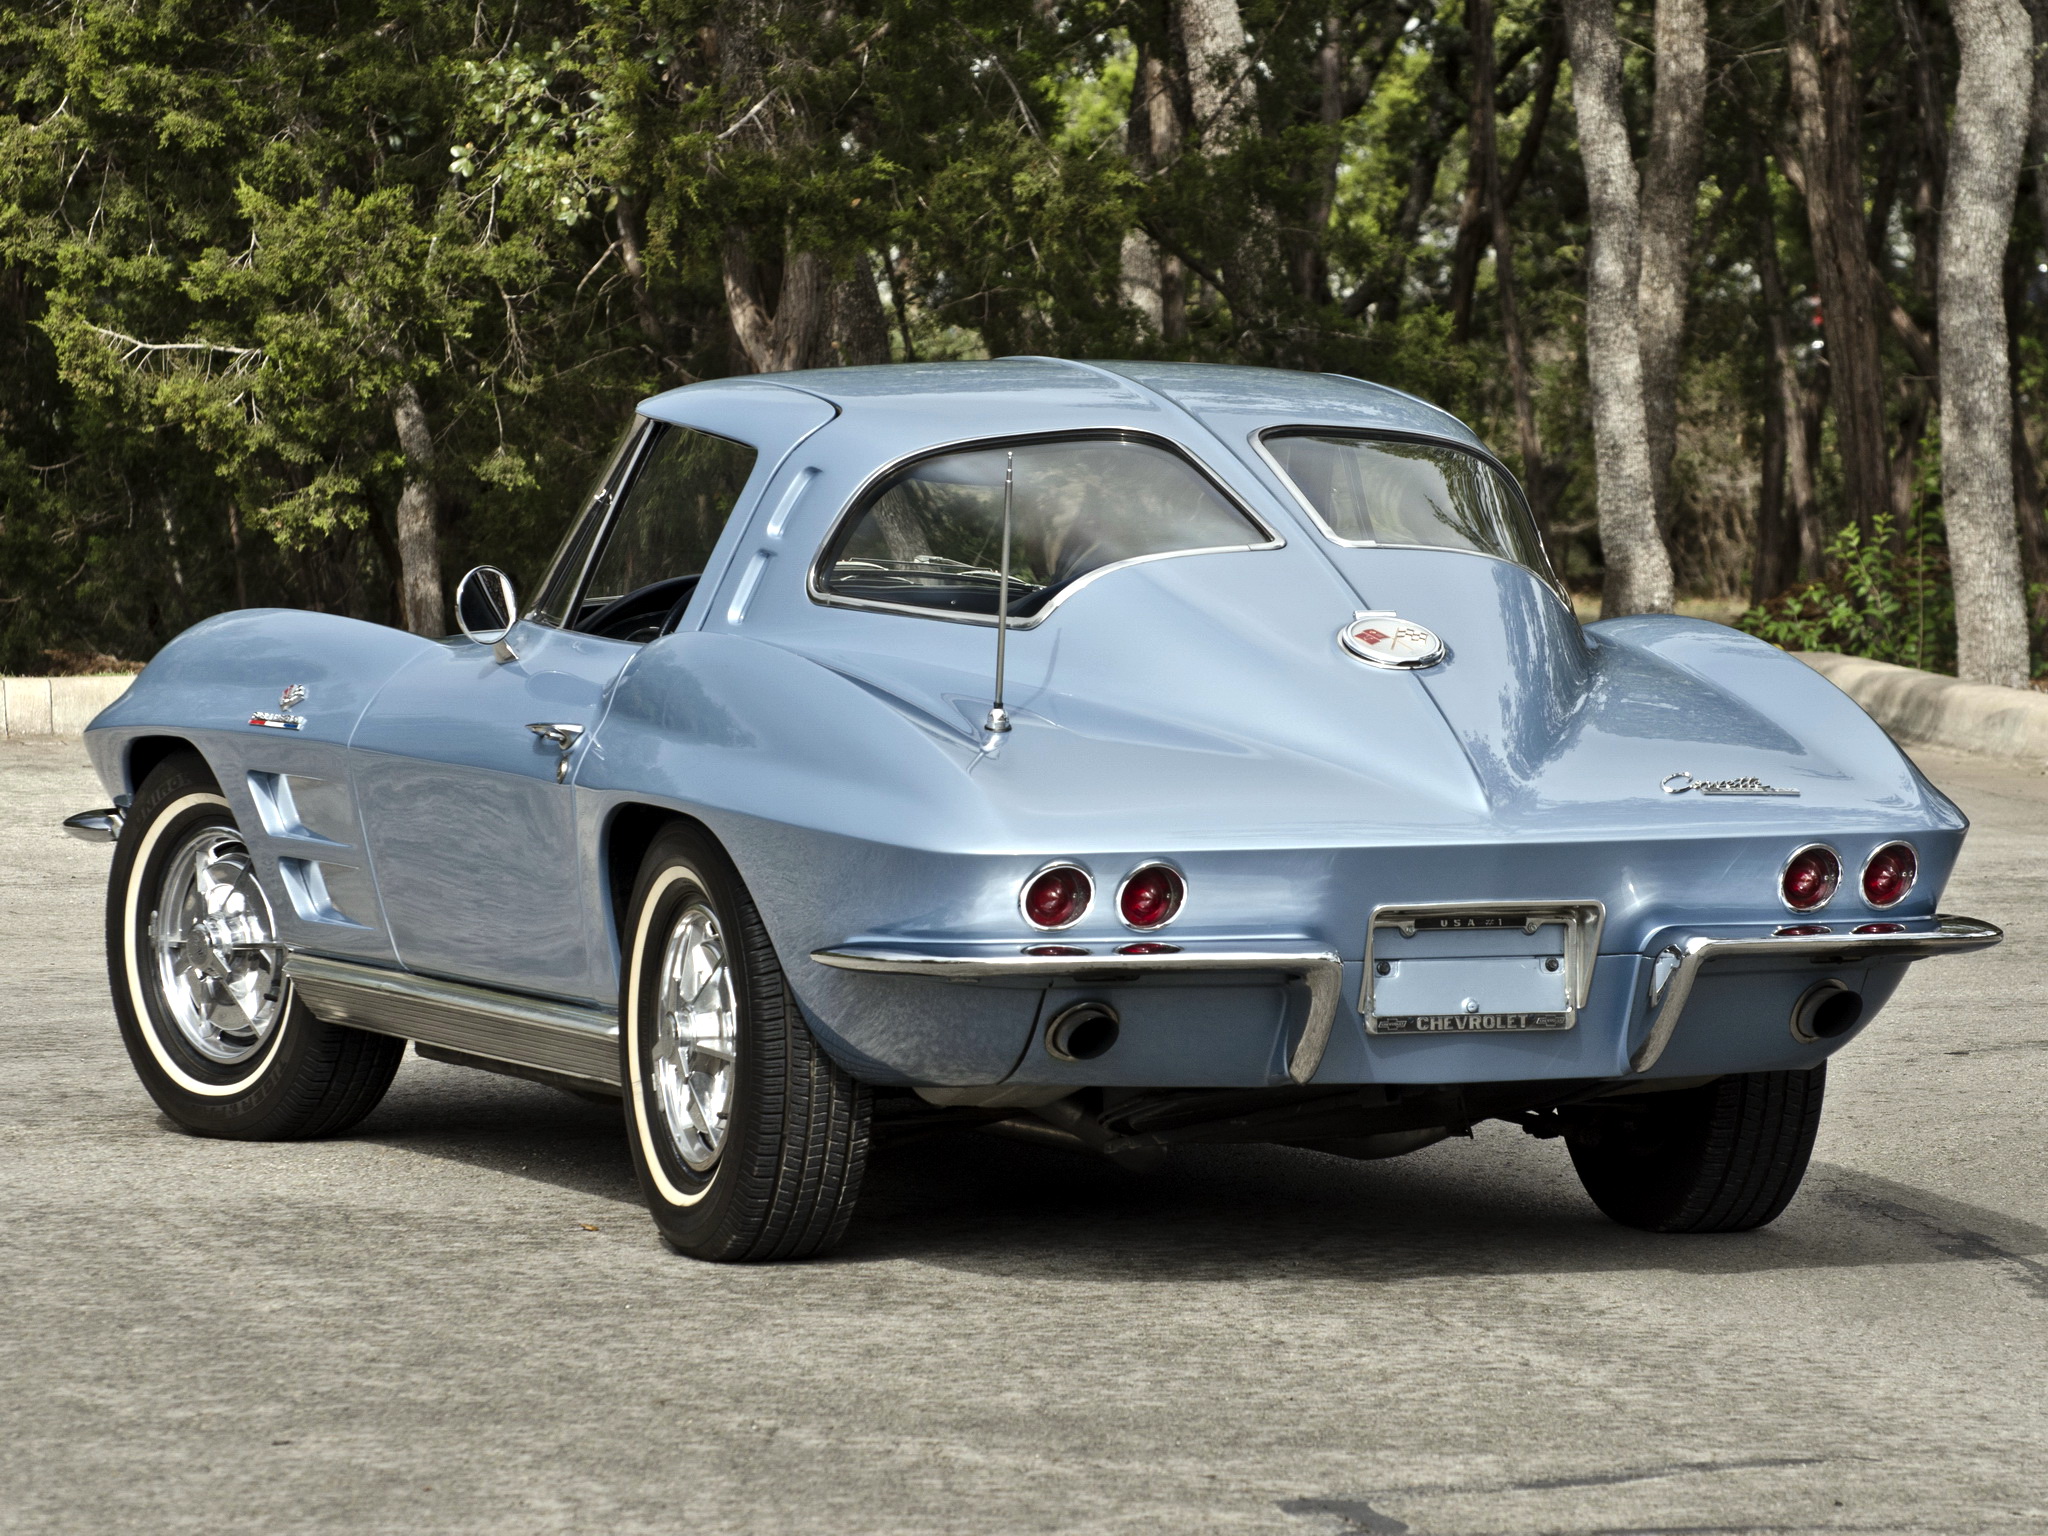 1963, Chevrolet, Corvette, Sting, Ray, L84, 327, Fuel, Injection, C 2, Supercar, Muscle, Classic, Jf Wallpaper